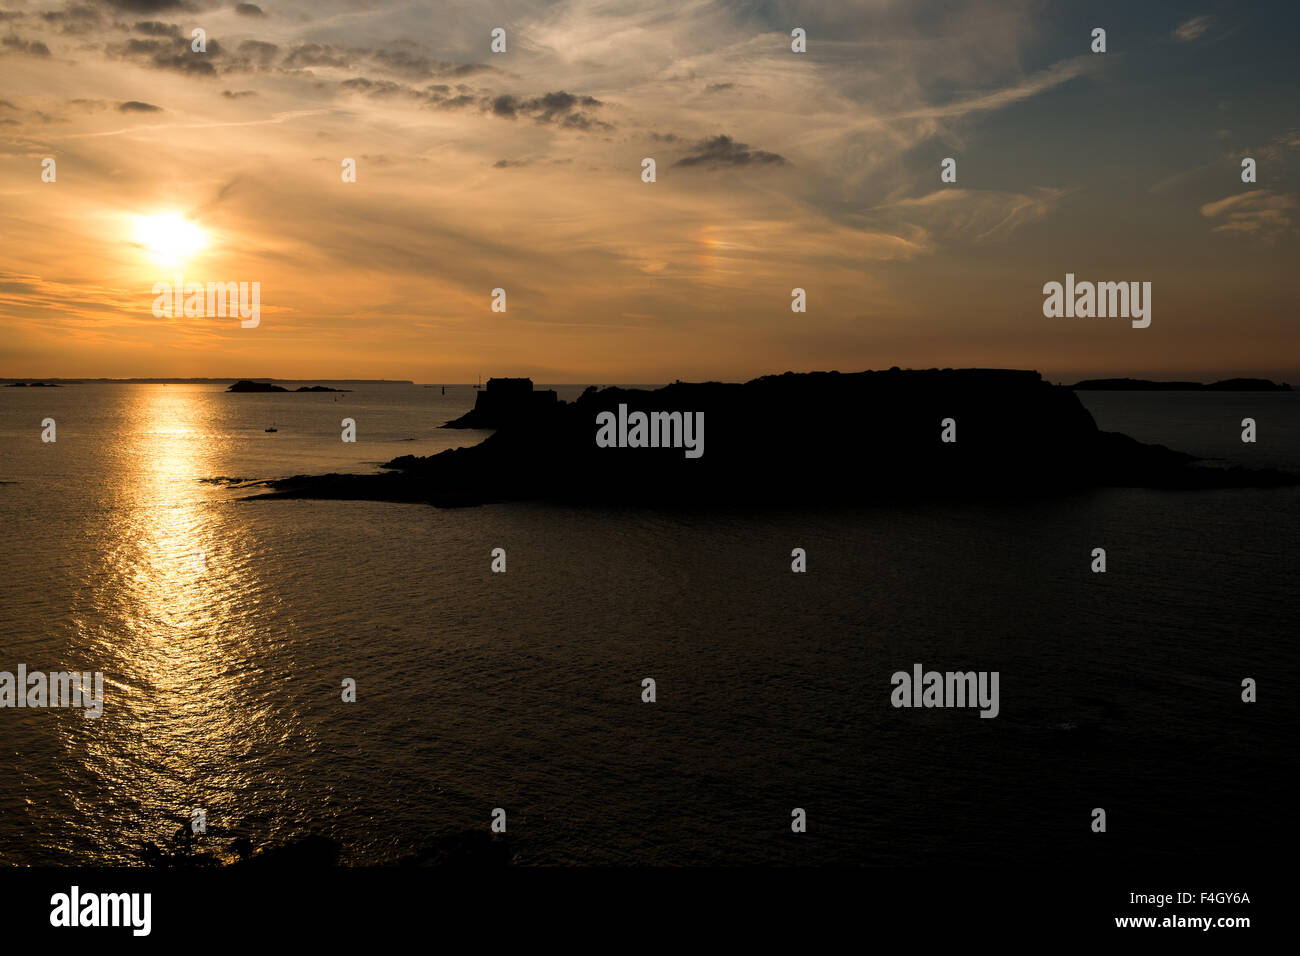 Beach and islands on the coast of St Malo, France at dusk Stock Photo